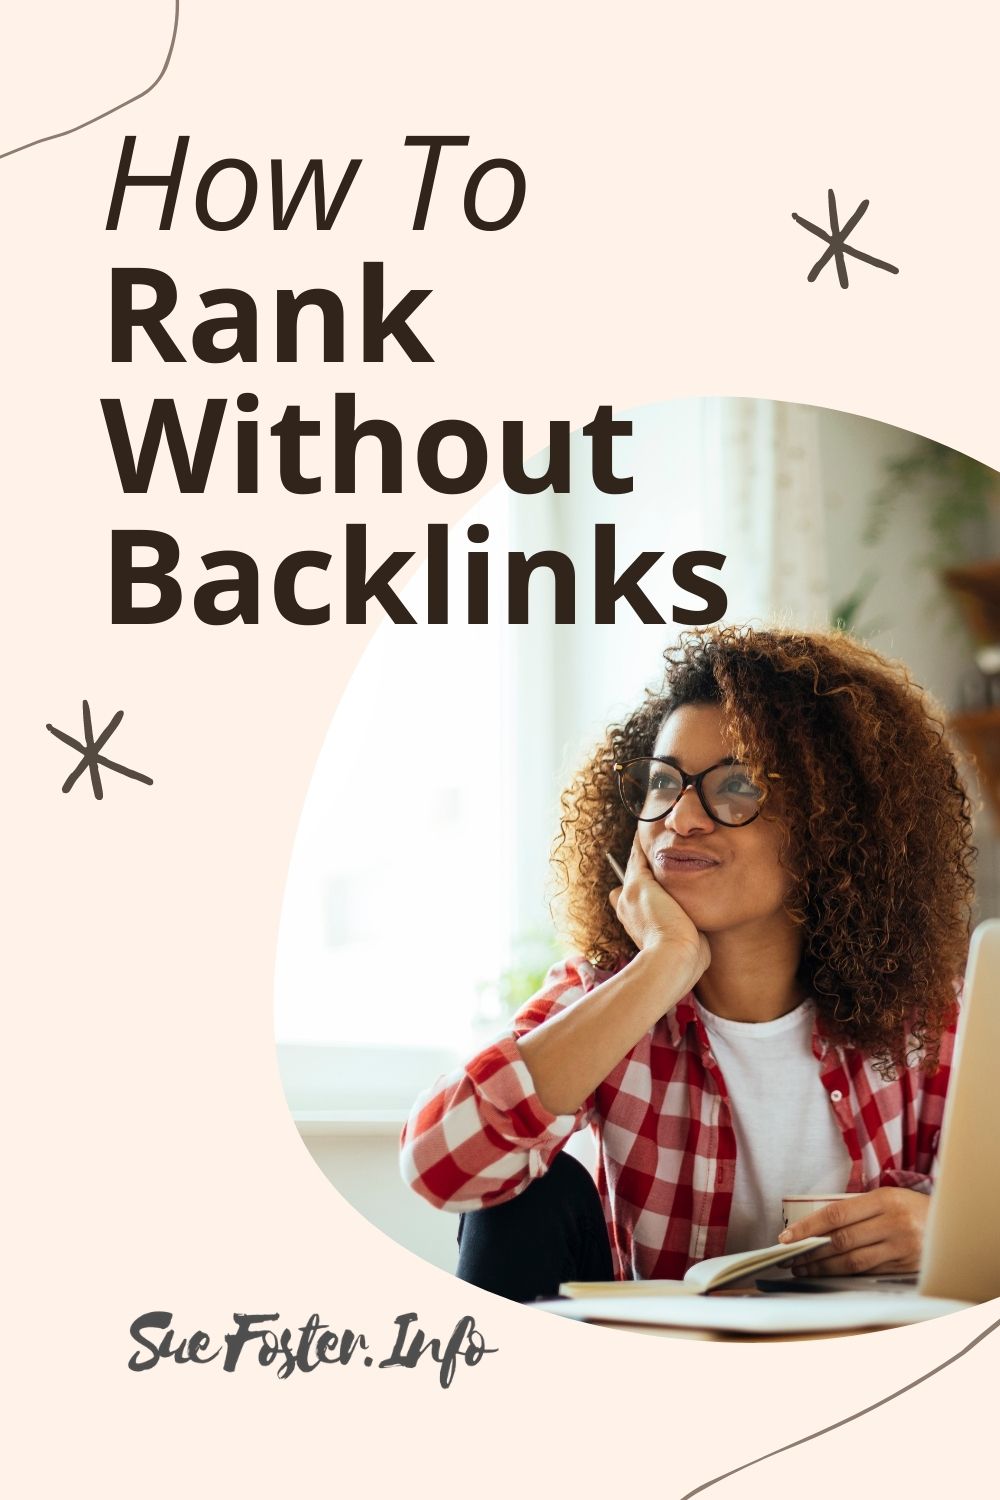 How to rank without backlinks